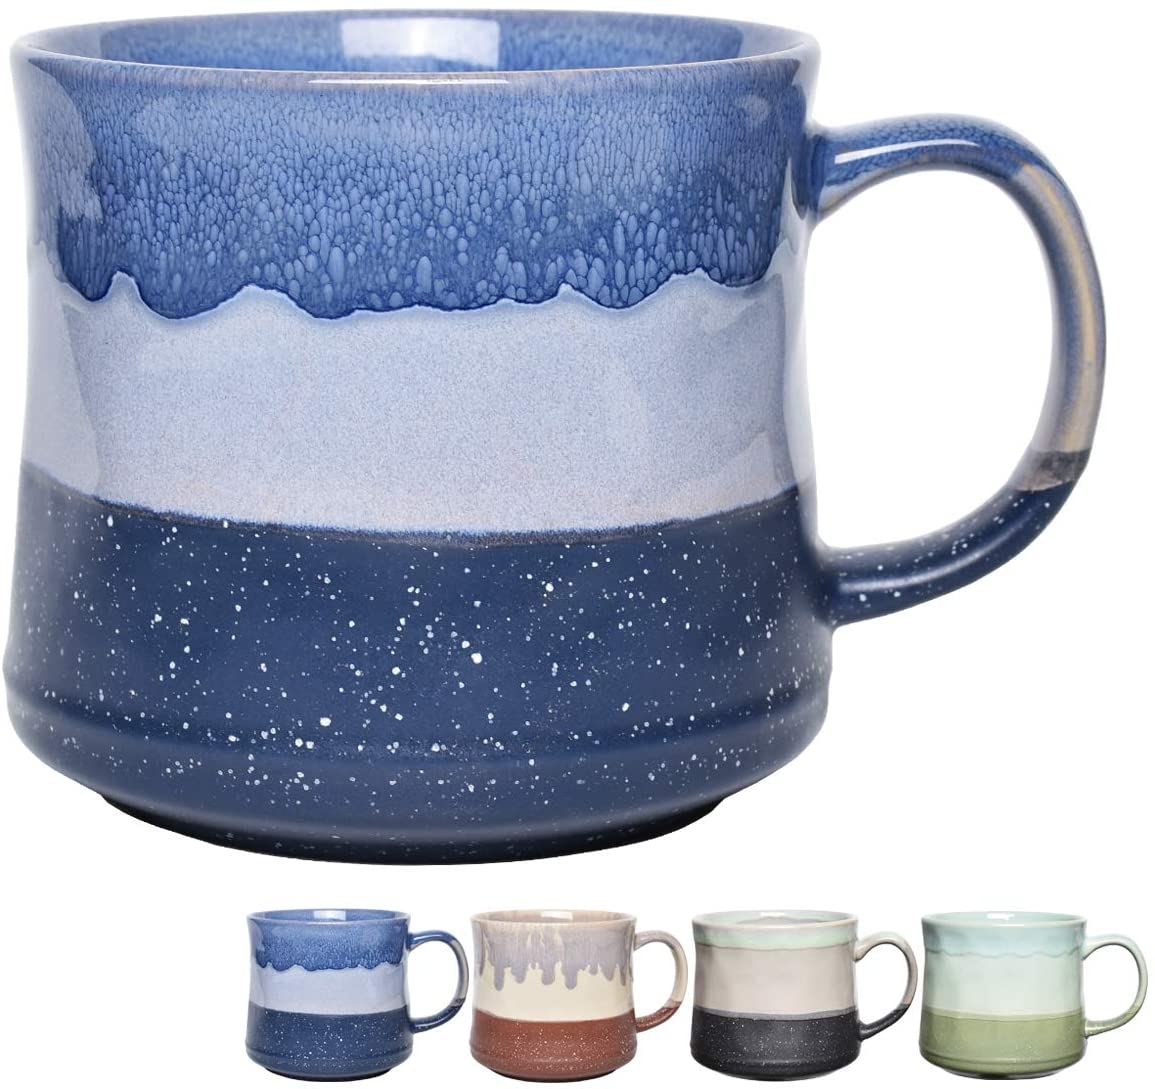 14-best-large-coffee-mugs-for-every-collection-relaxing-decor